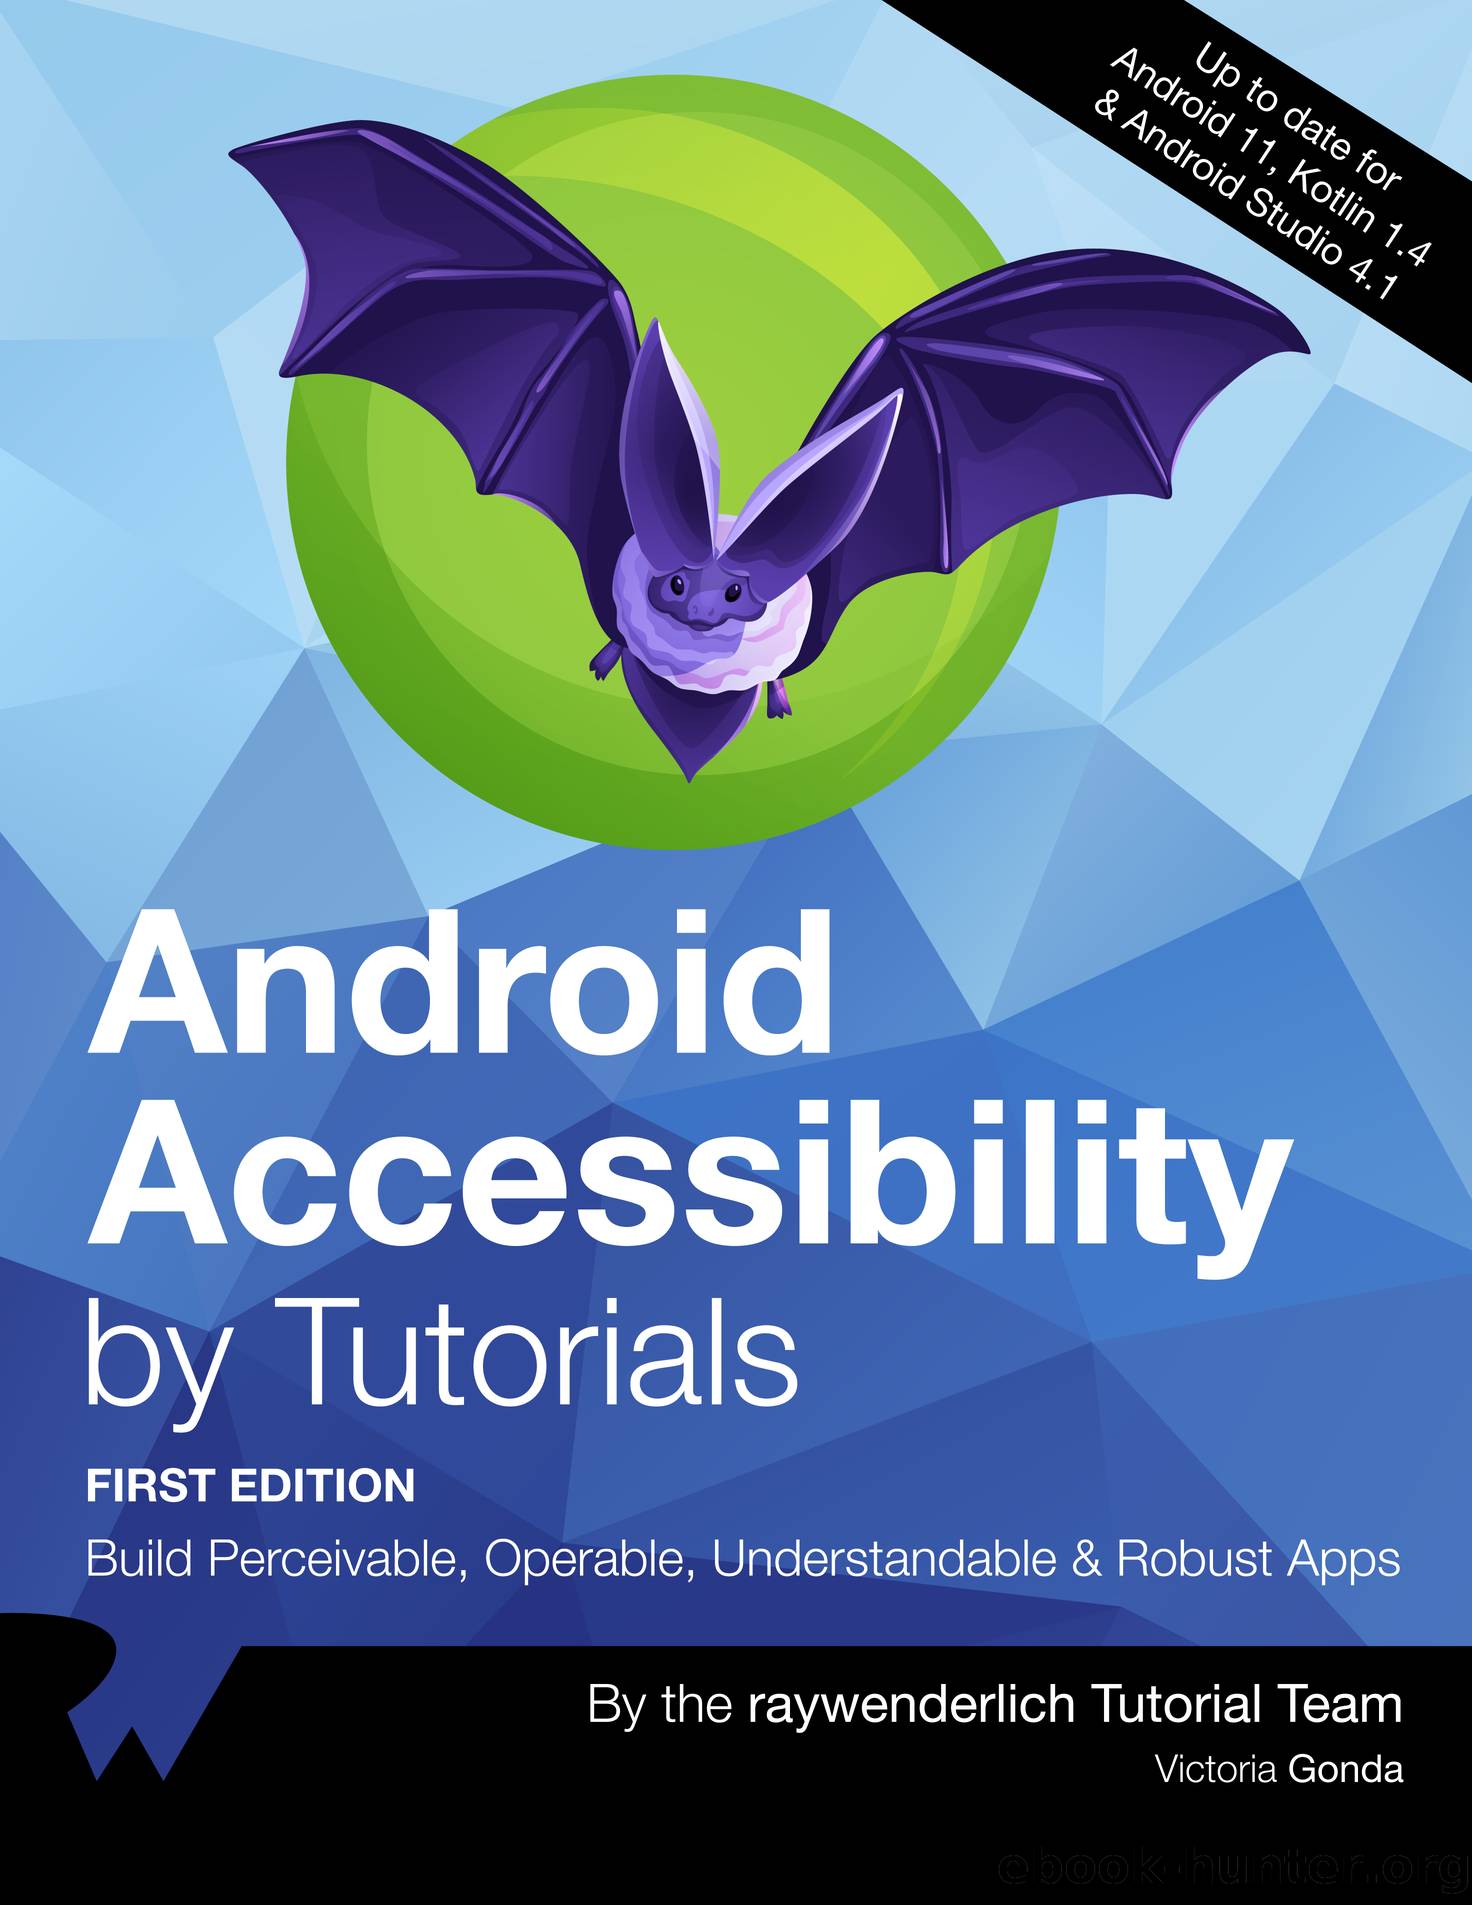 Android Accessibility by Tutorials by By Victoria Gonda